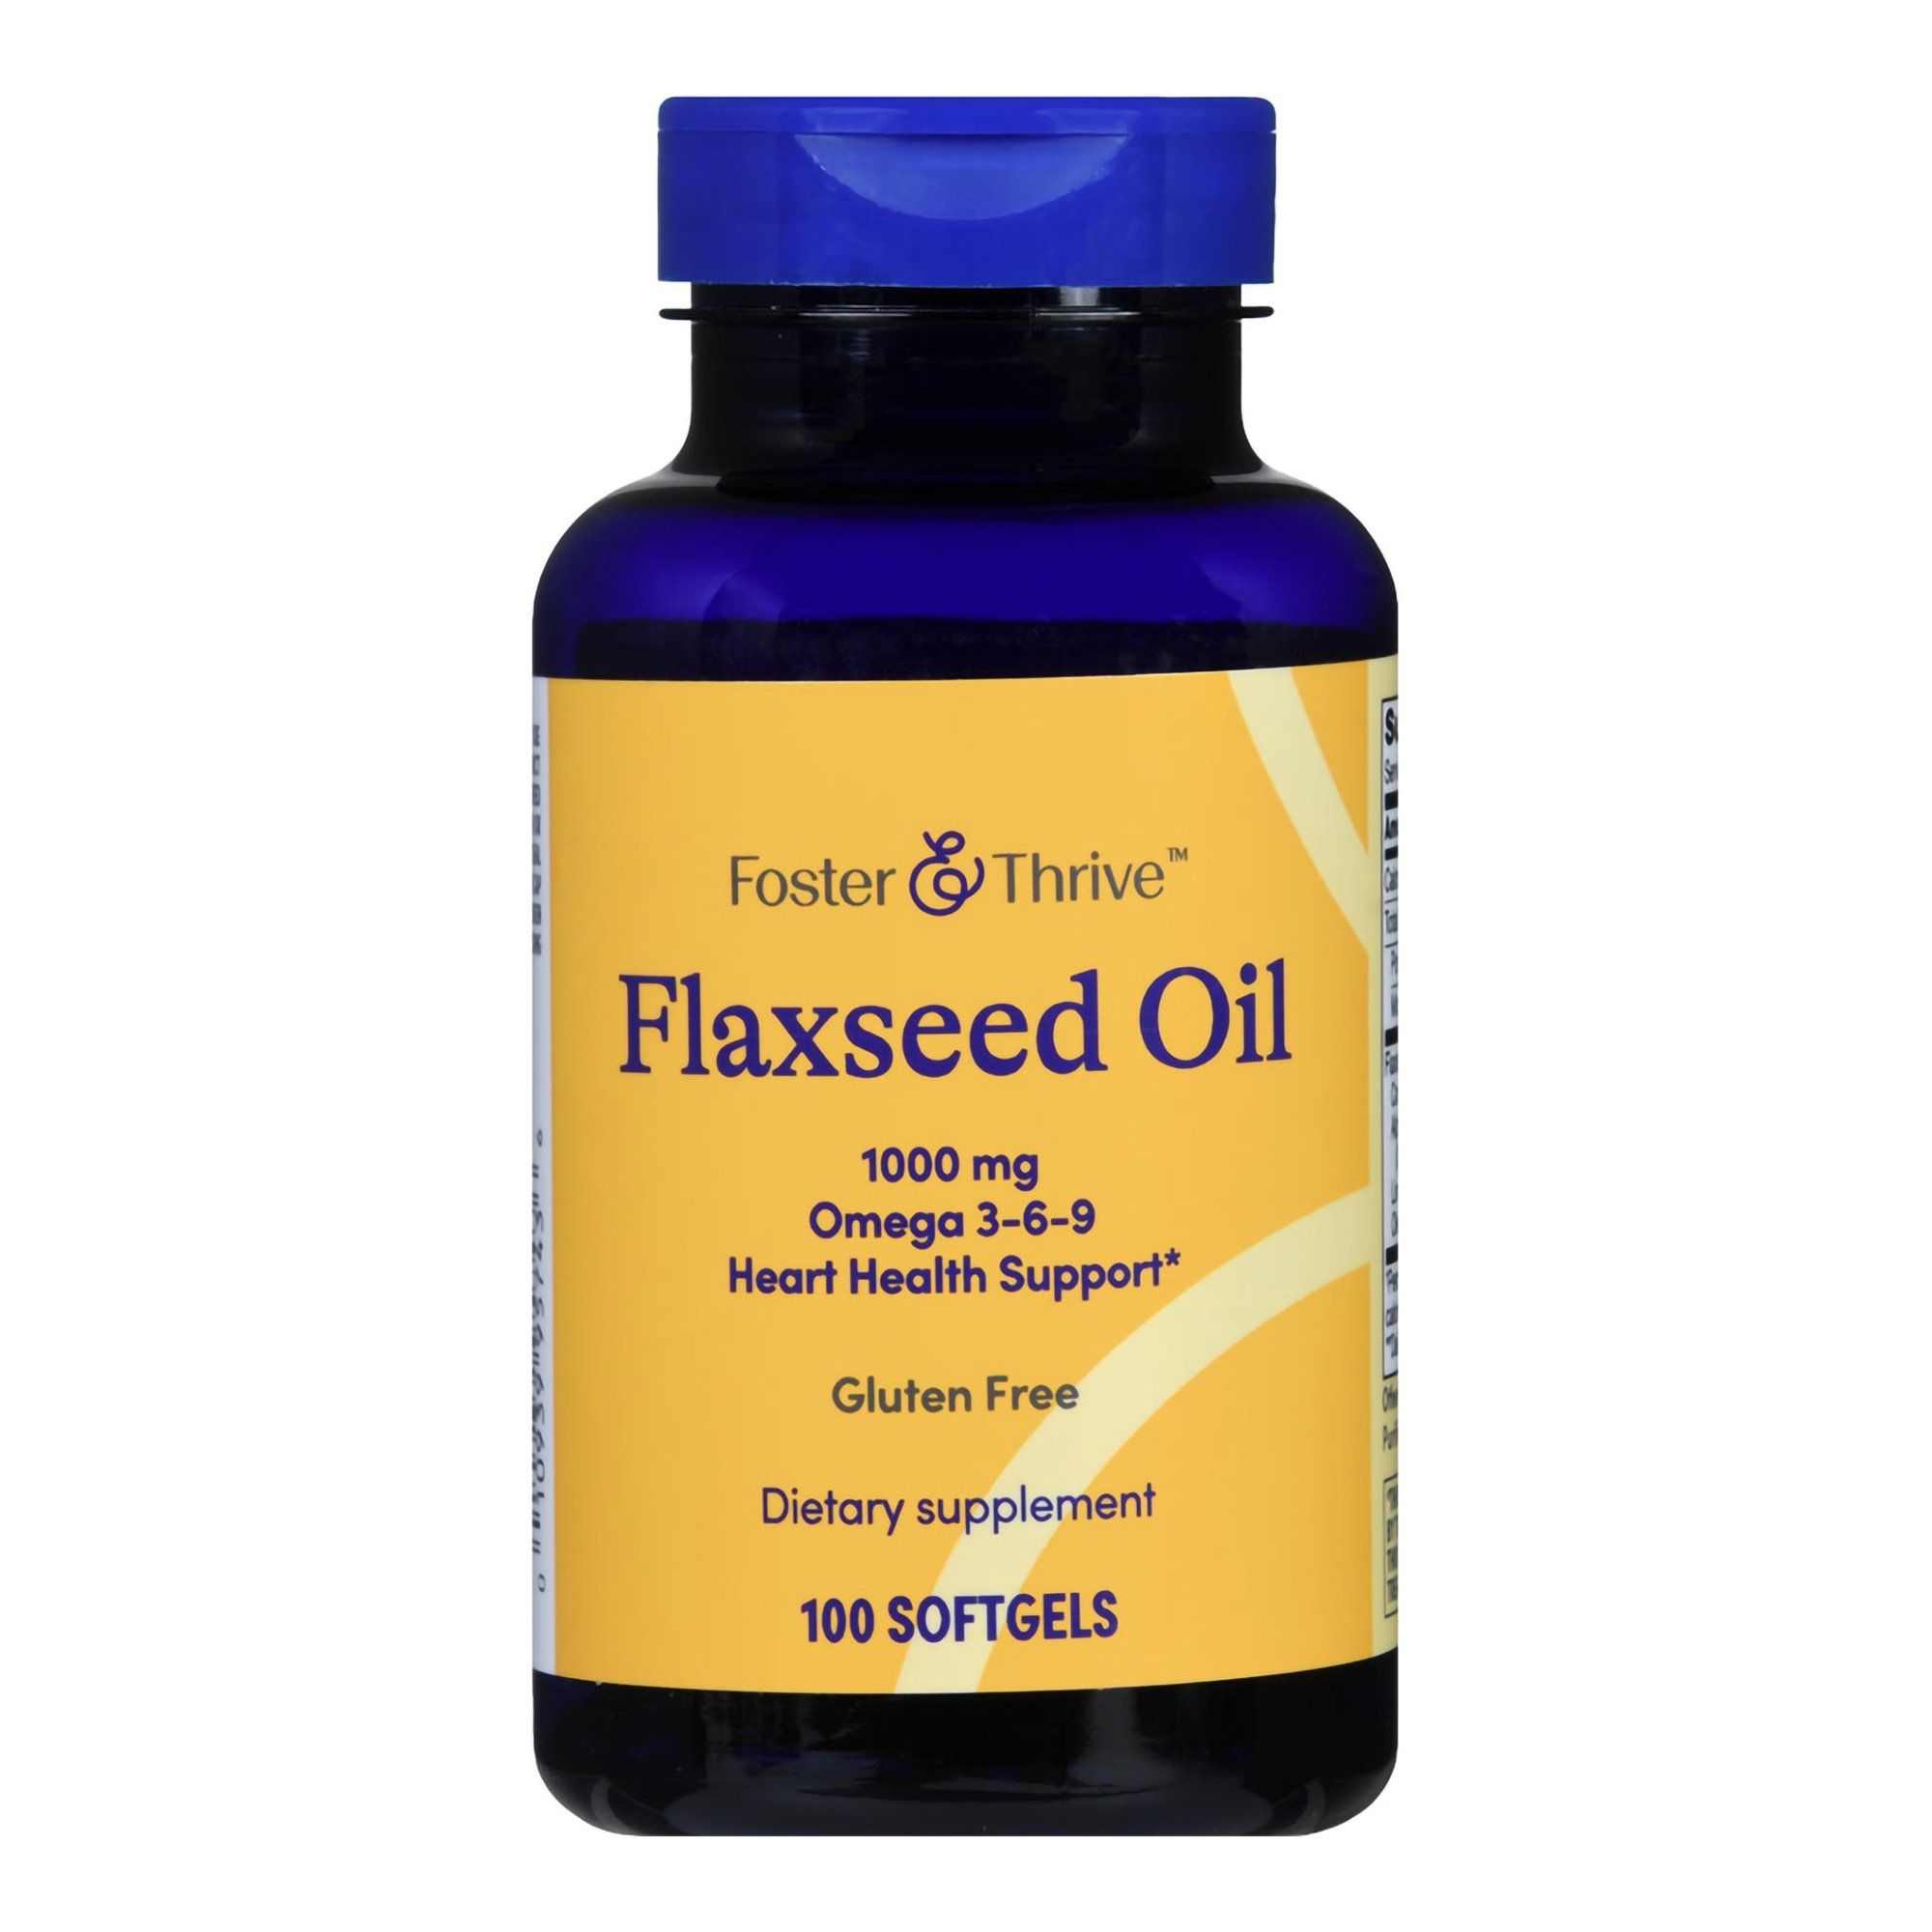 Foster & Thrive Flaxseed Oil Omega 3-6-9 Softgels, 1000 mg - 100 ct